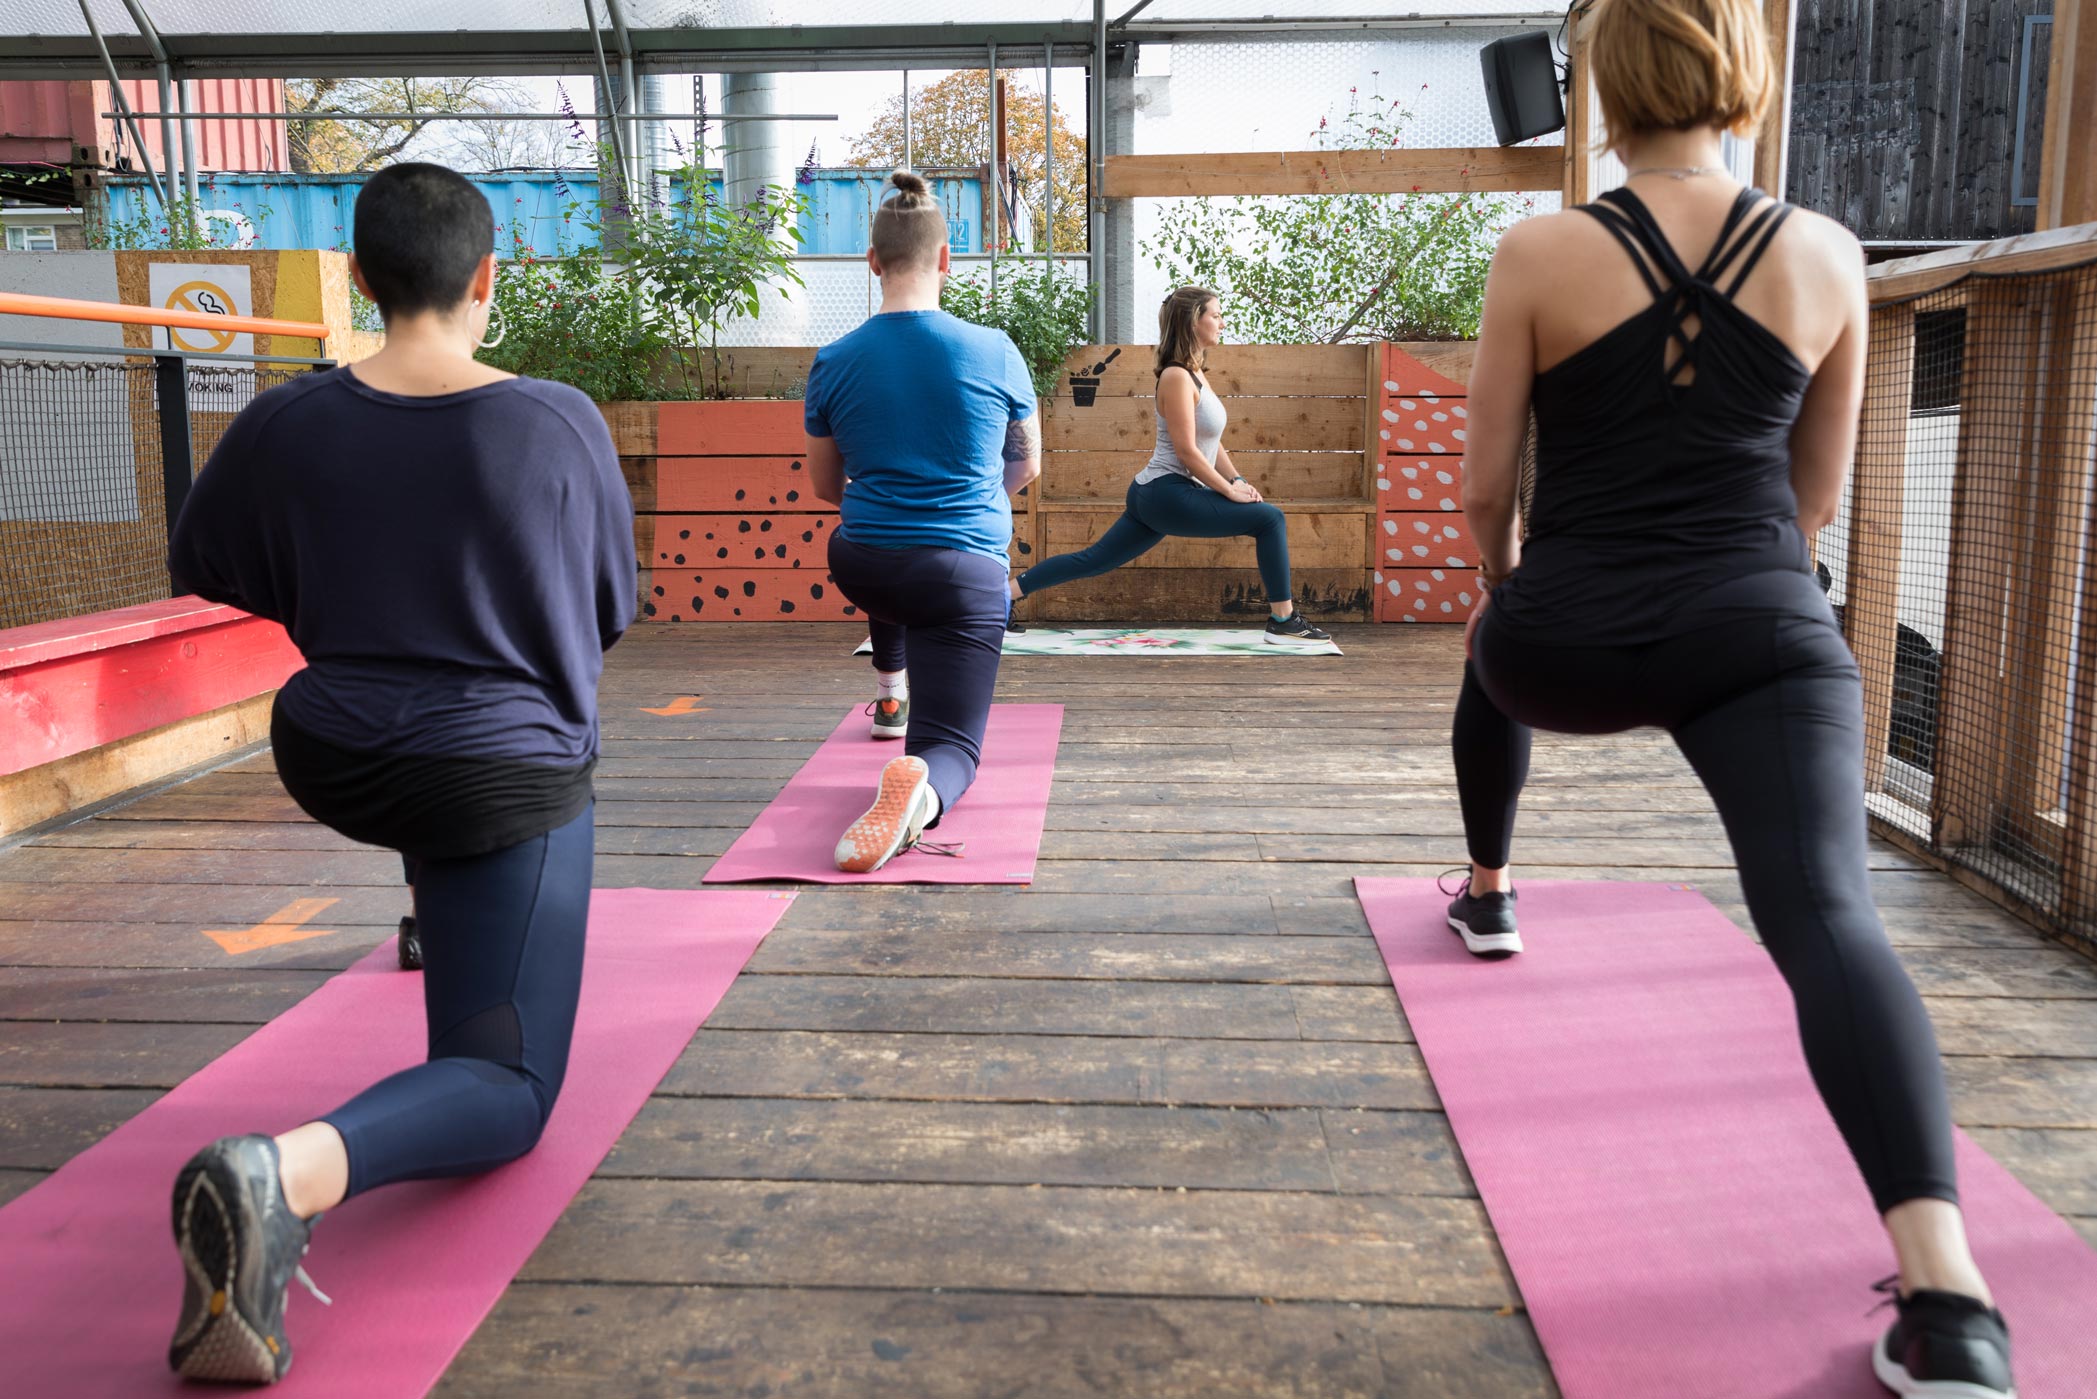 A fitness instructor leads an exercise class in Brixton, London during a personal branding photography shoot